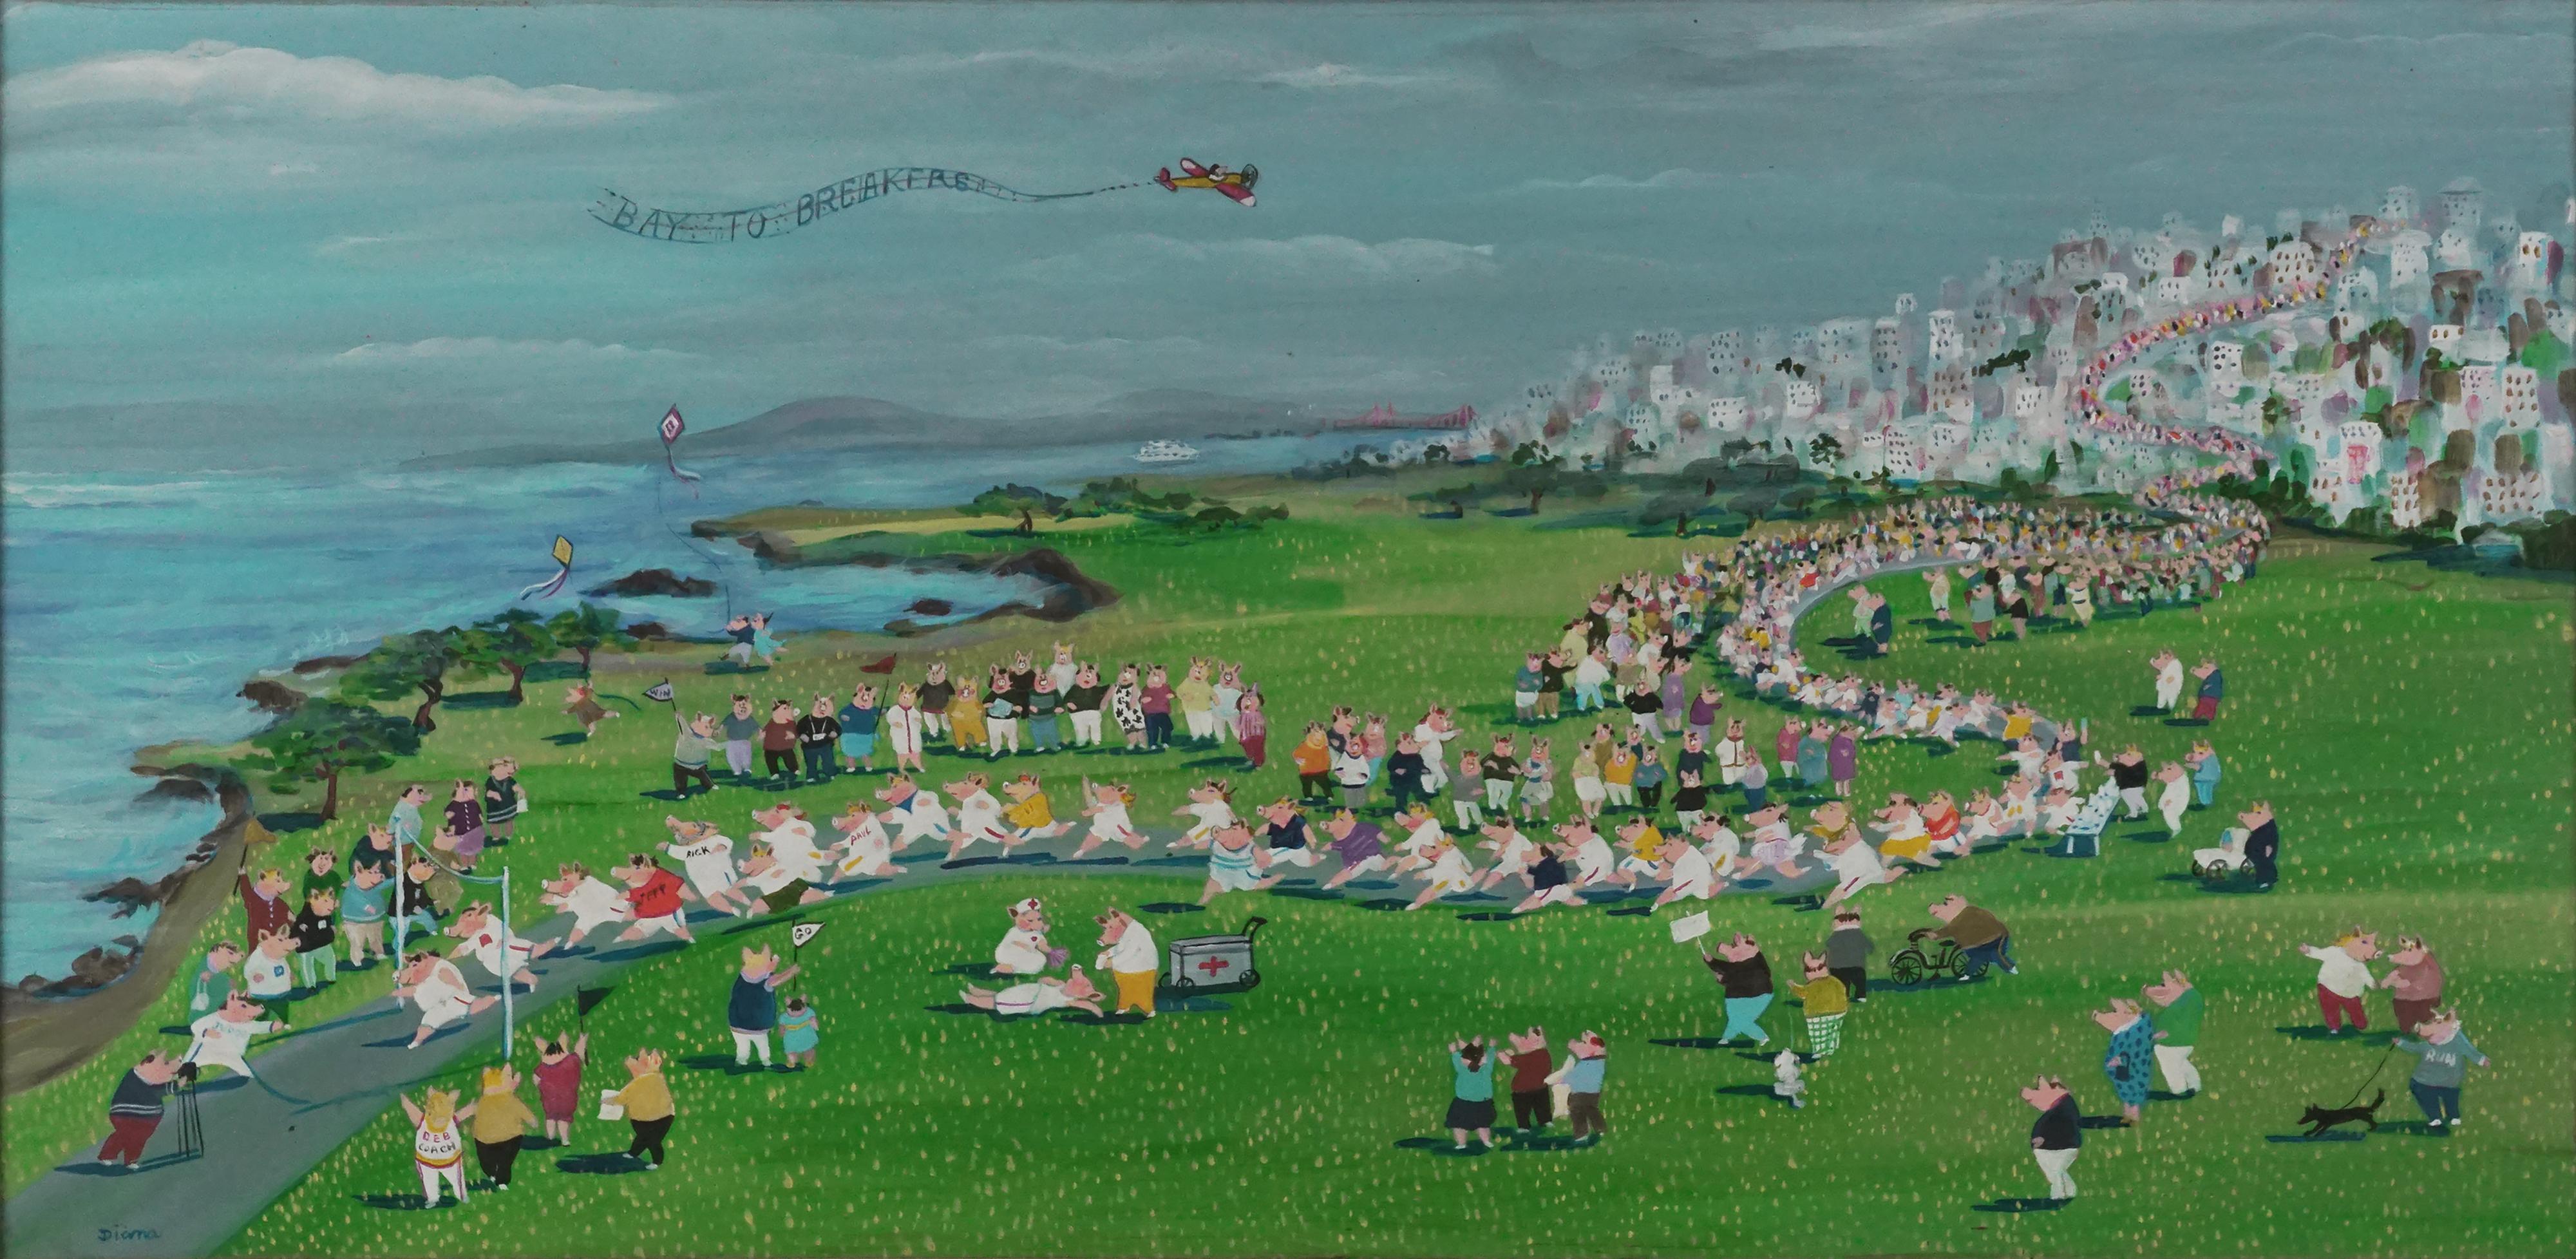 San Francisco Bay to Breakers  - Painting by Diana Willson